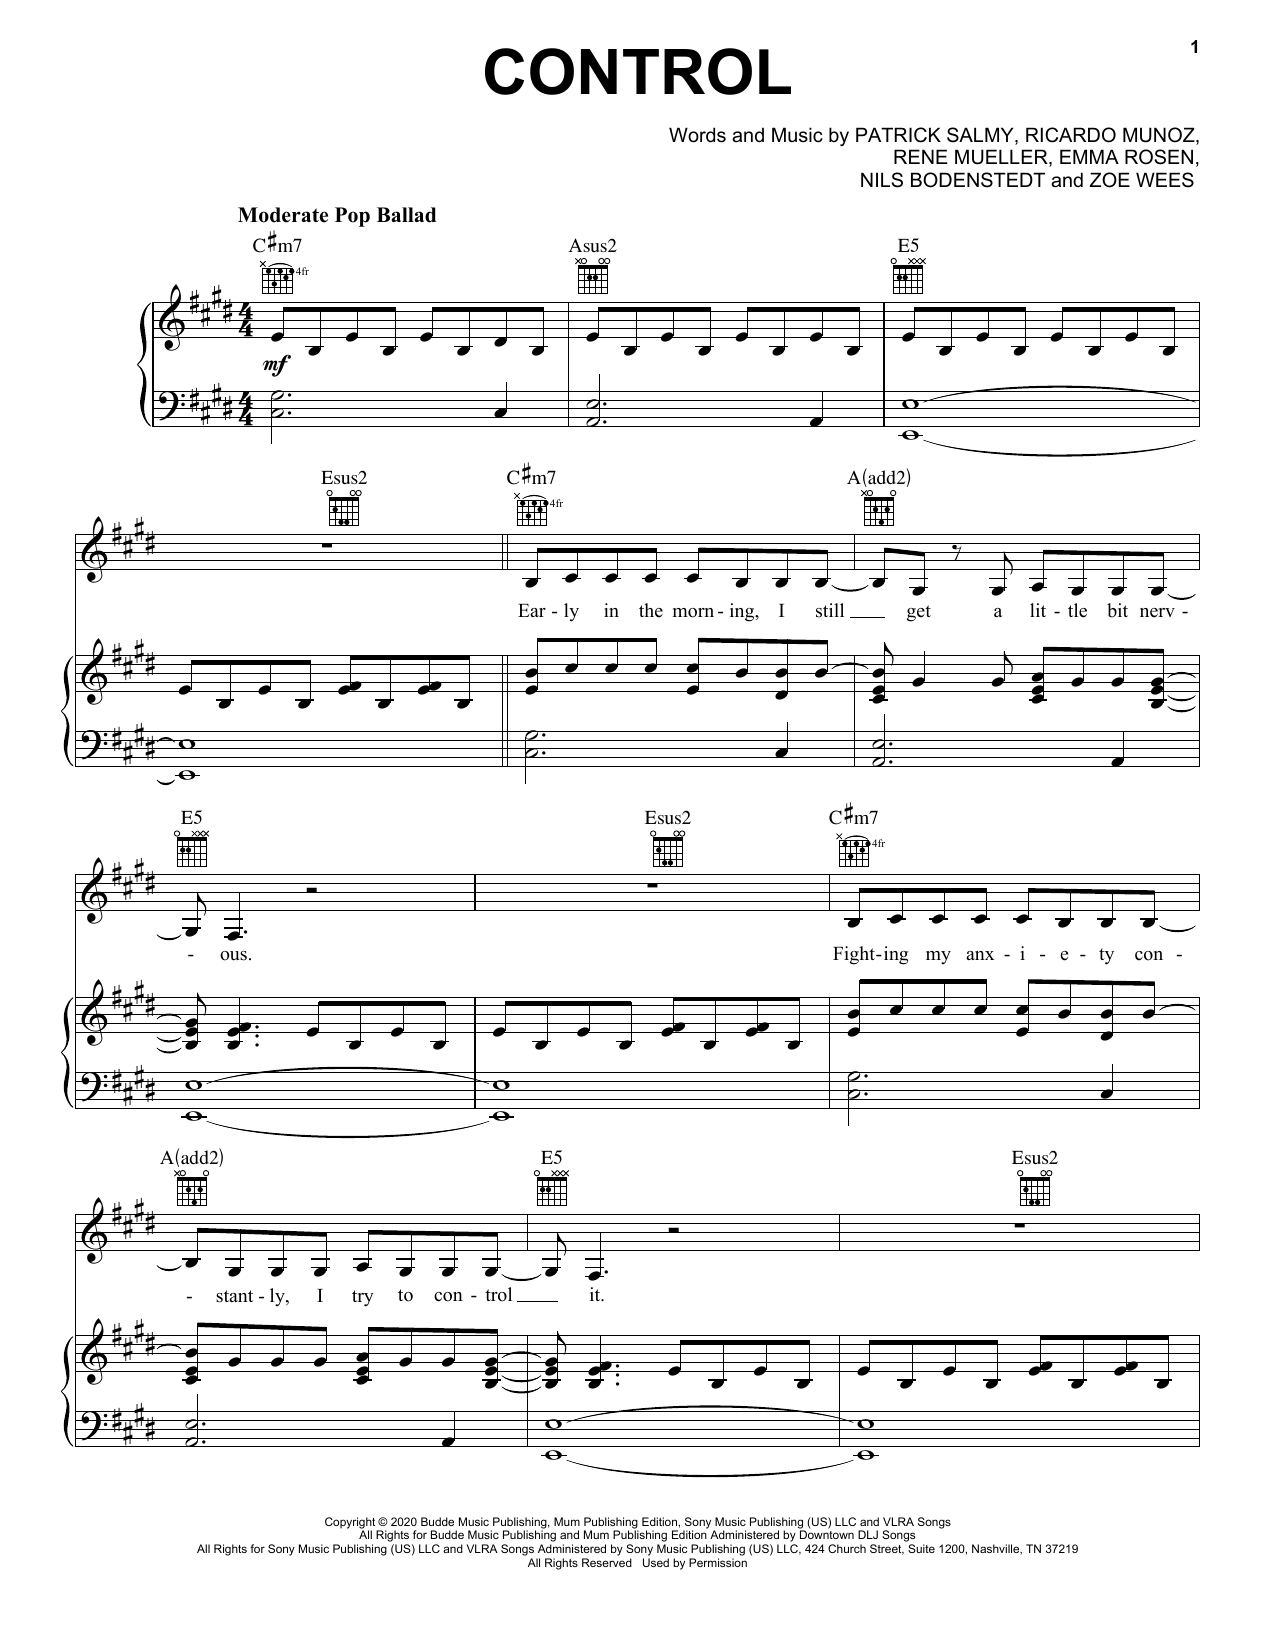 Download Zoe Wees Control Sheet Music